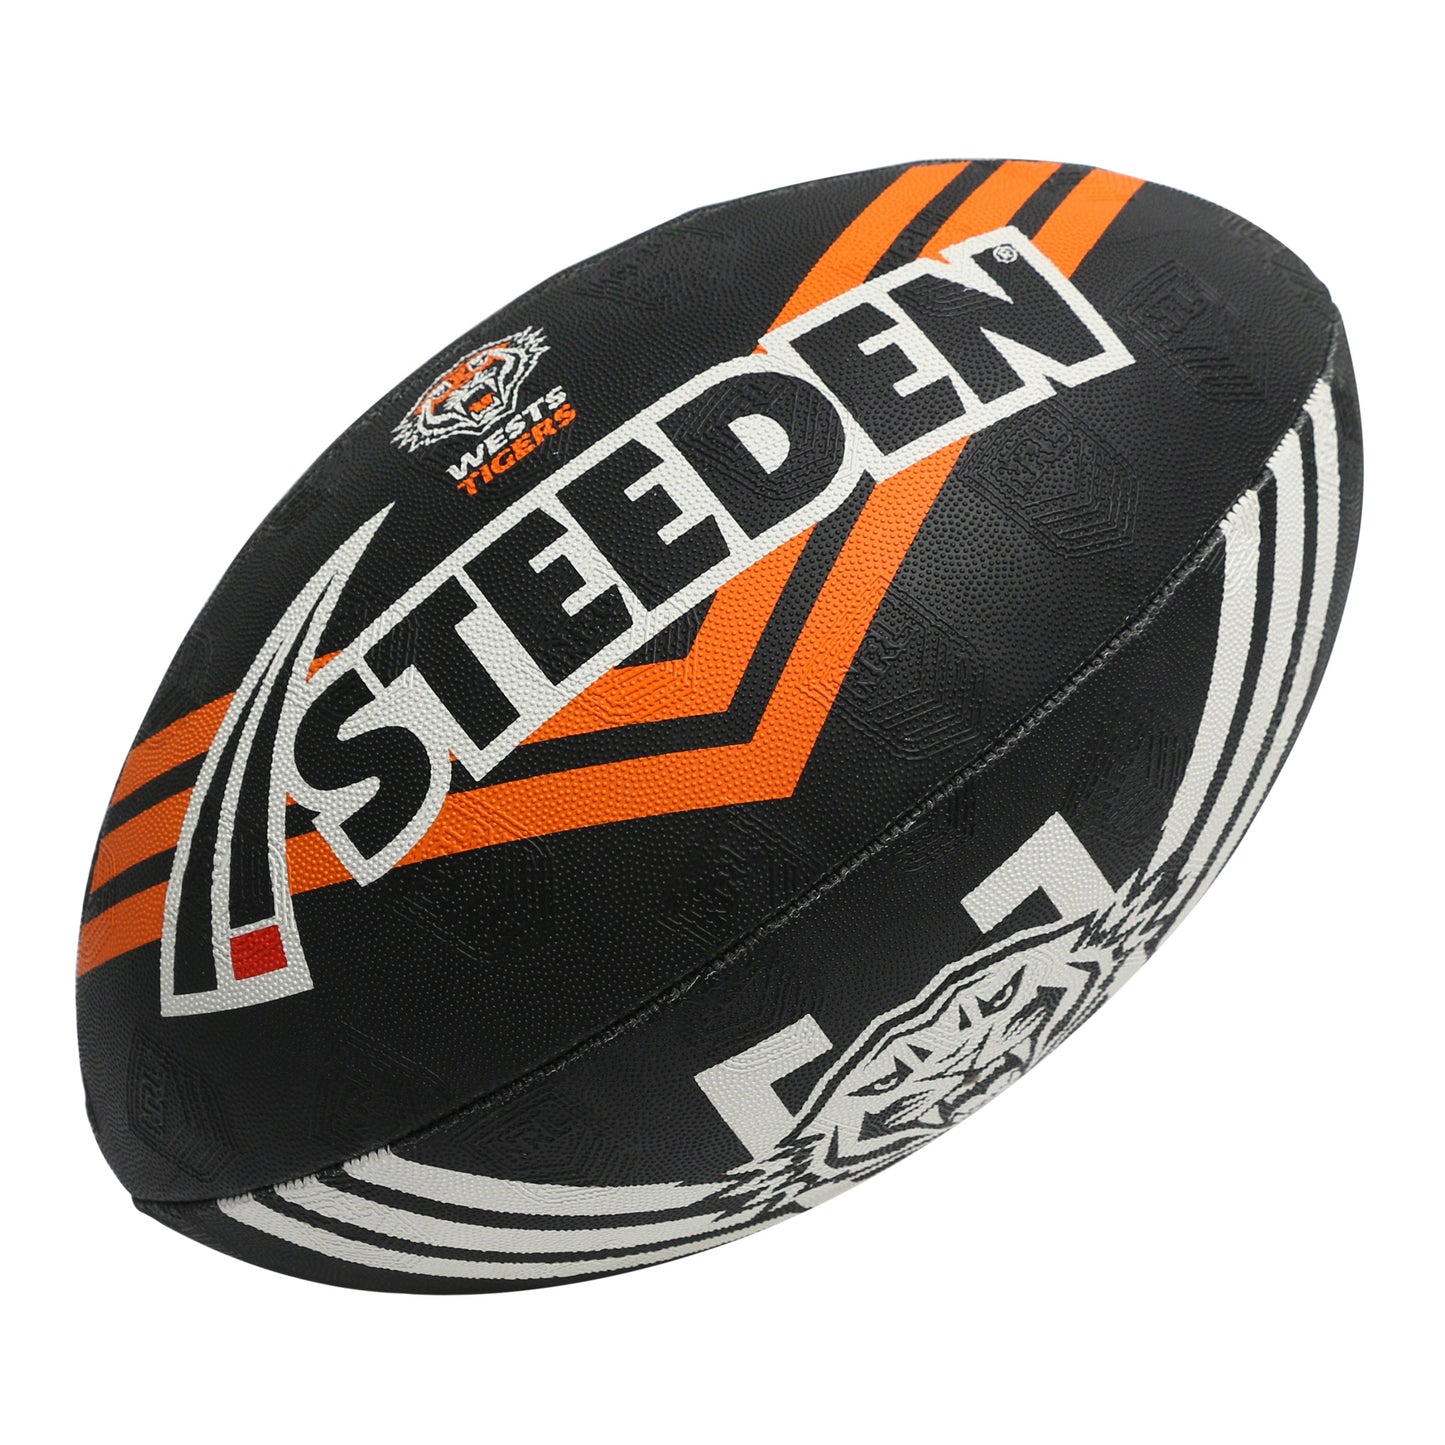 NRL Tigers Supporter Ball (11 inch)